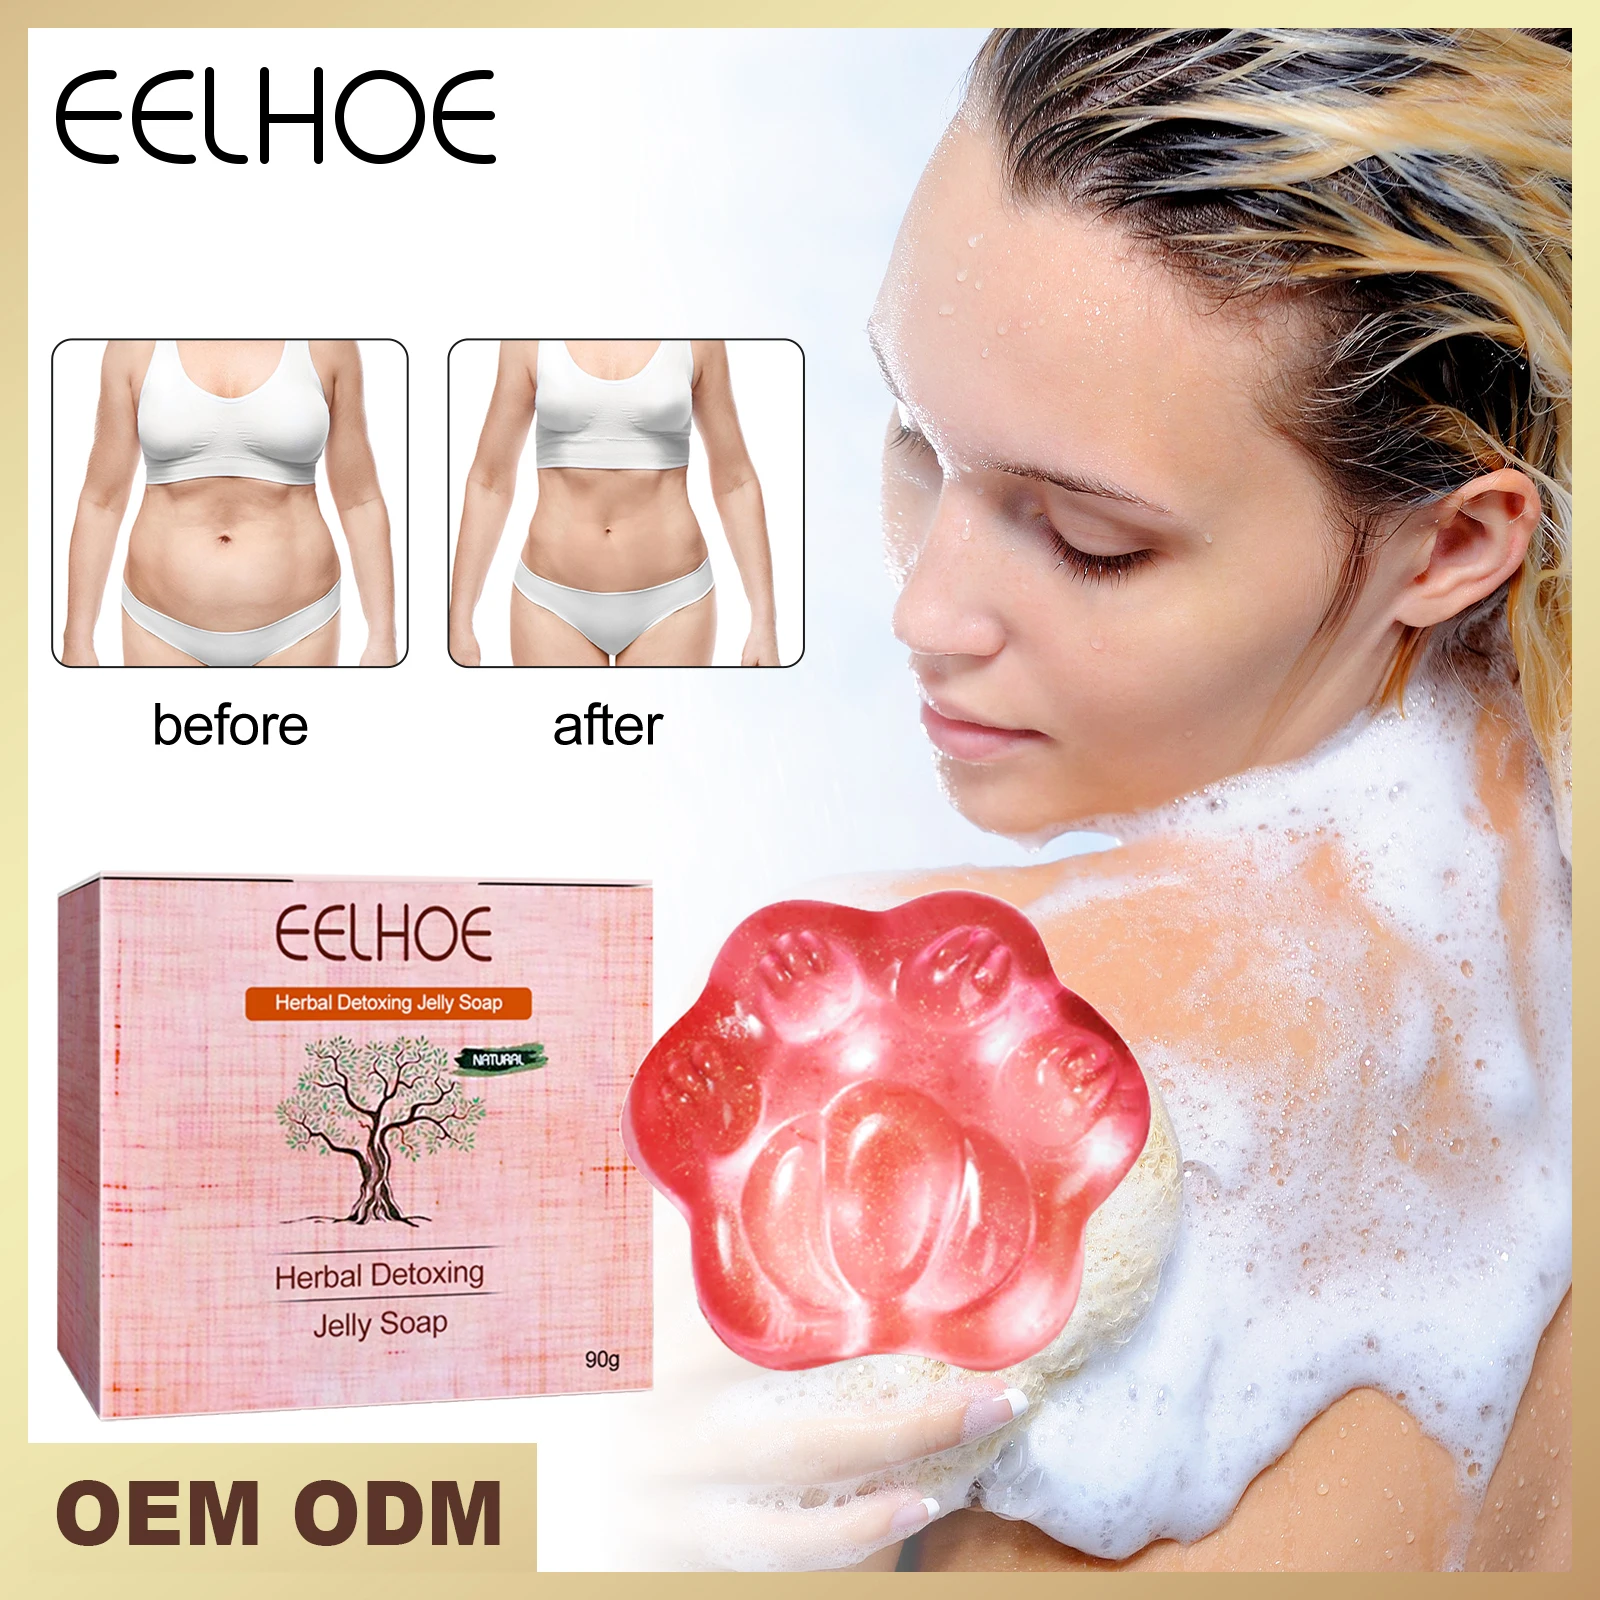 

2022 Herbal Slimming Jelly Soap Herbal Essence Moisturizes Firming Skin Deep Cleansing Slimming Shaping Soap